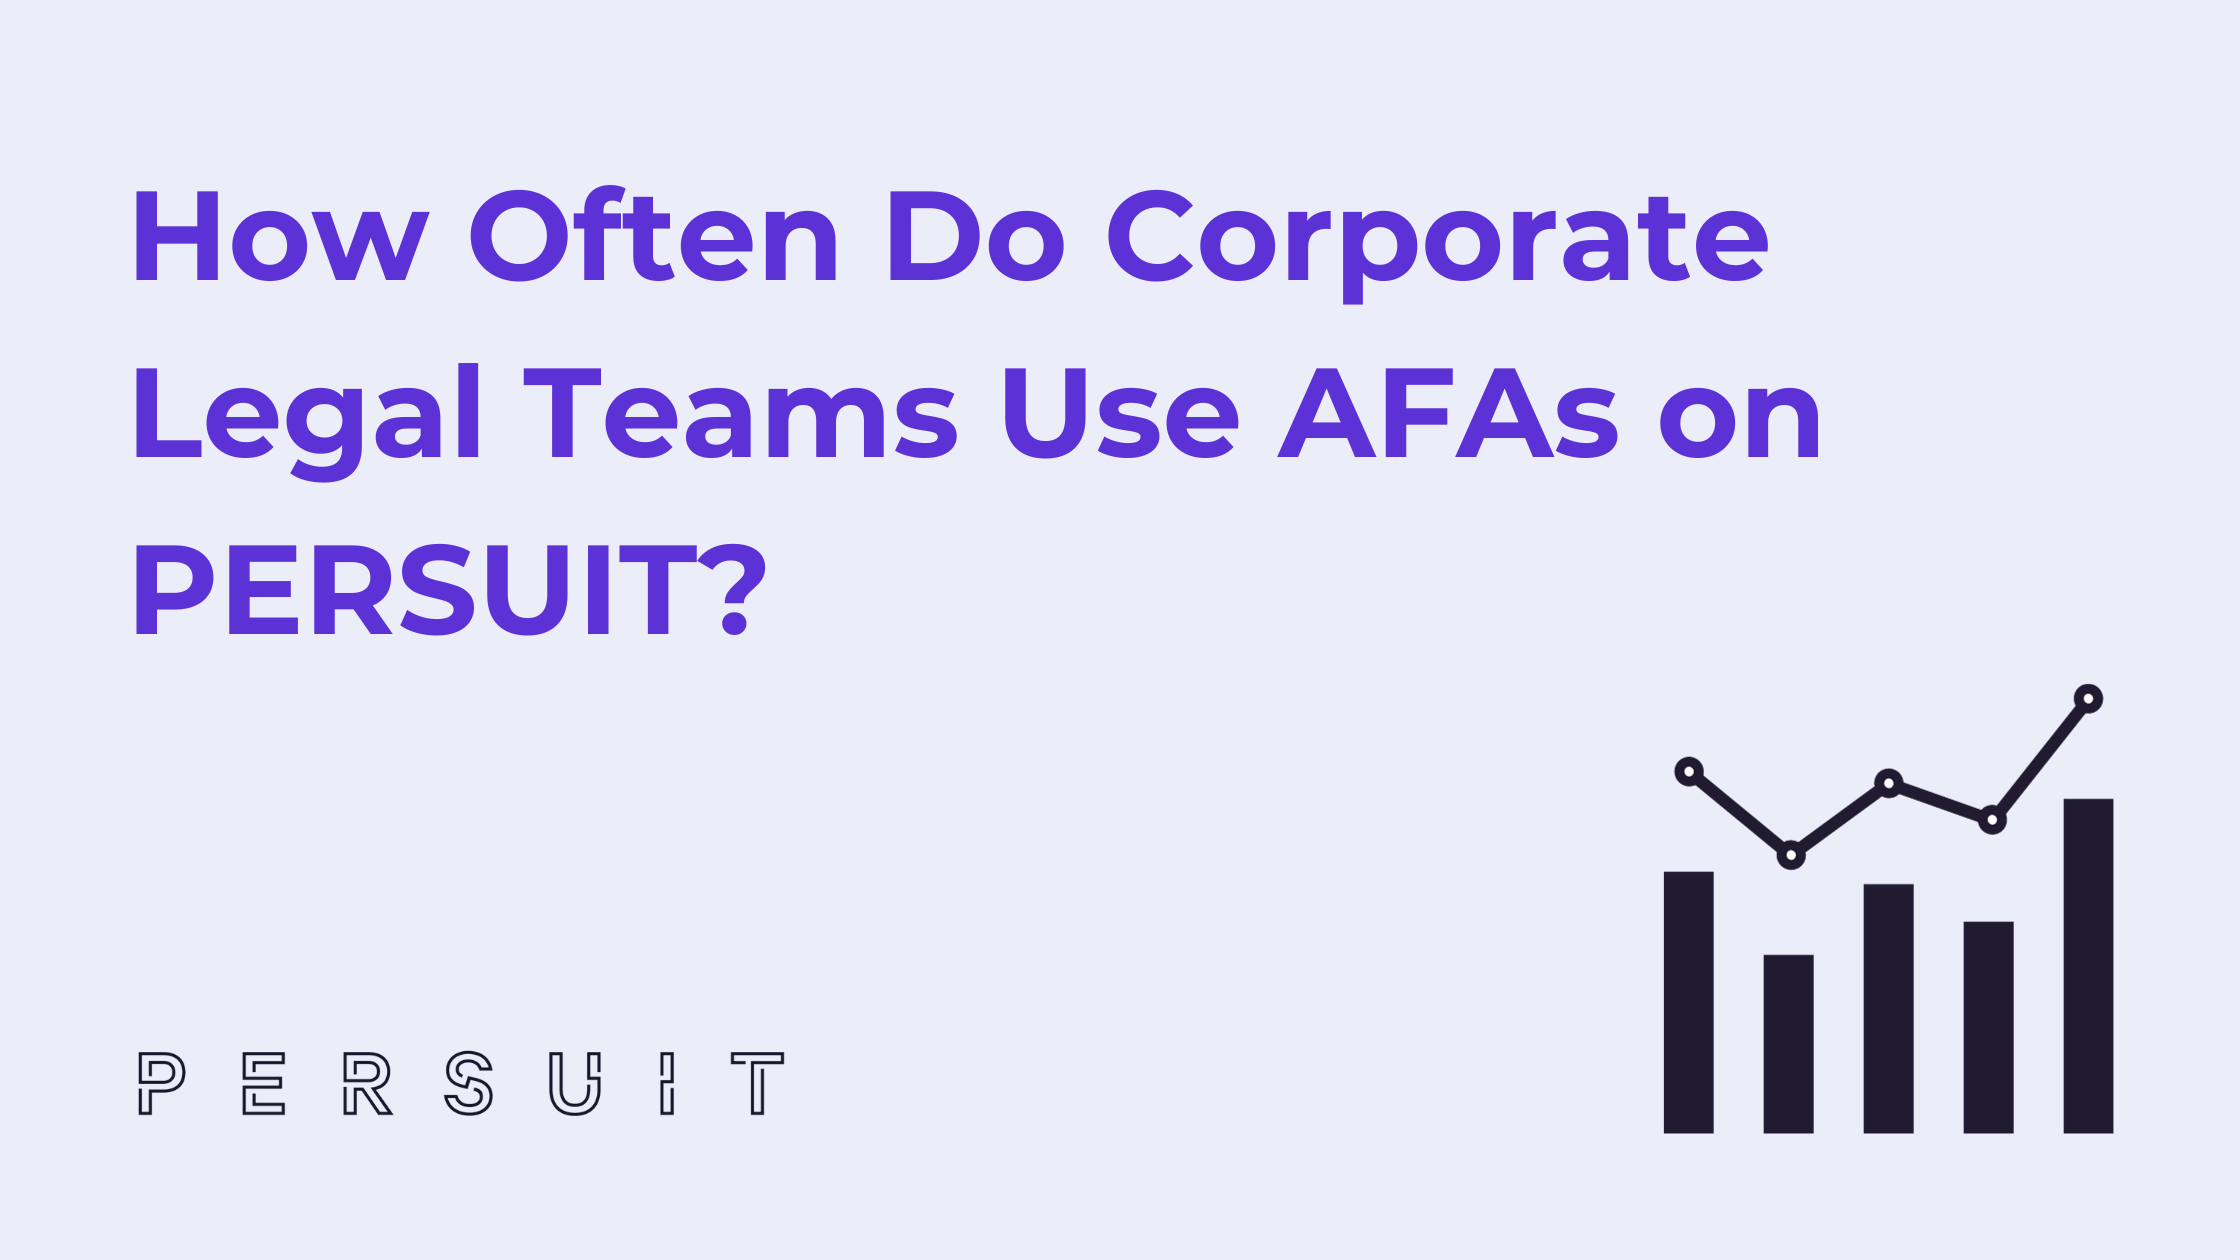 How Often Do Corporate Legal Teams Use AFAs on PERSUIT?